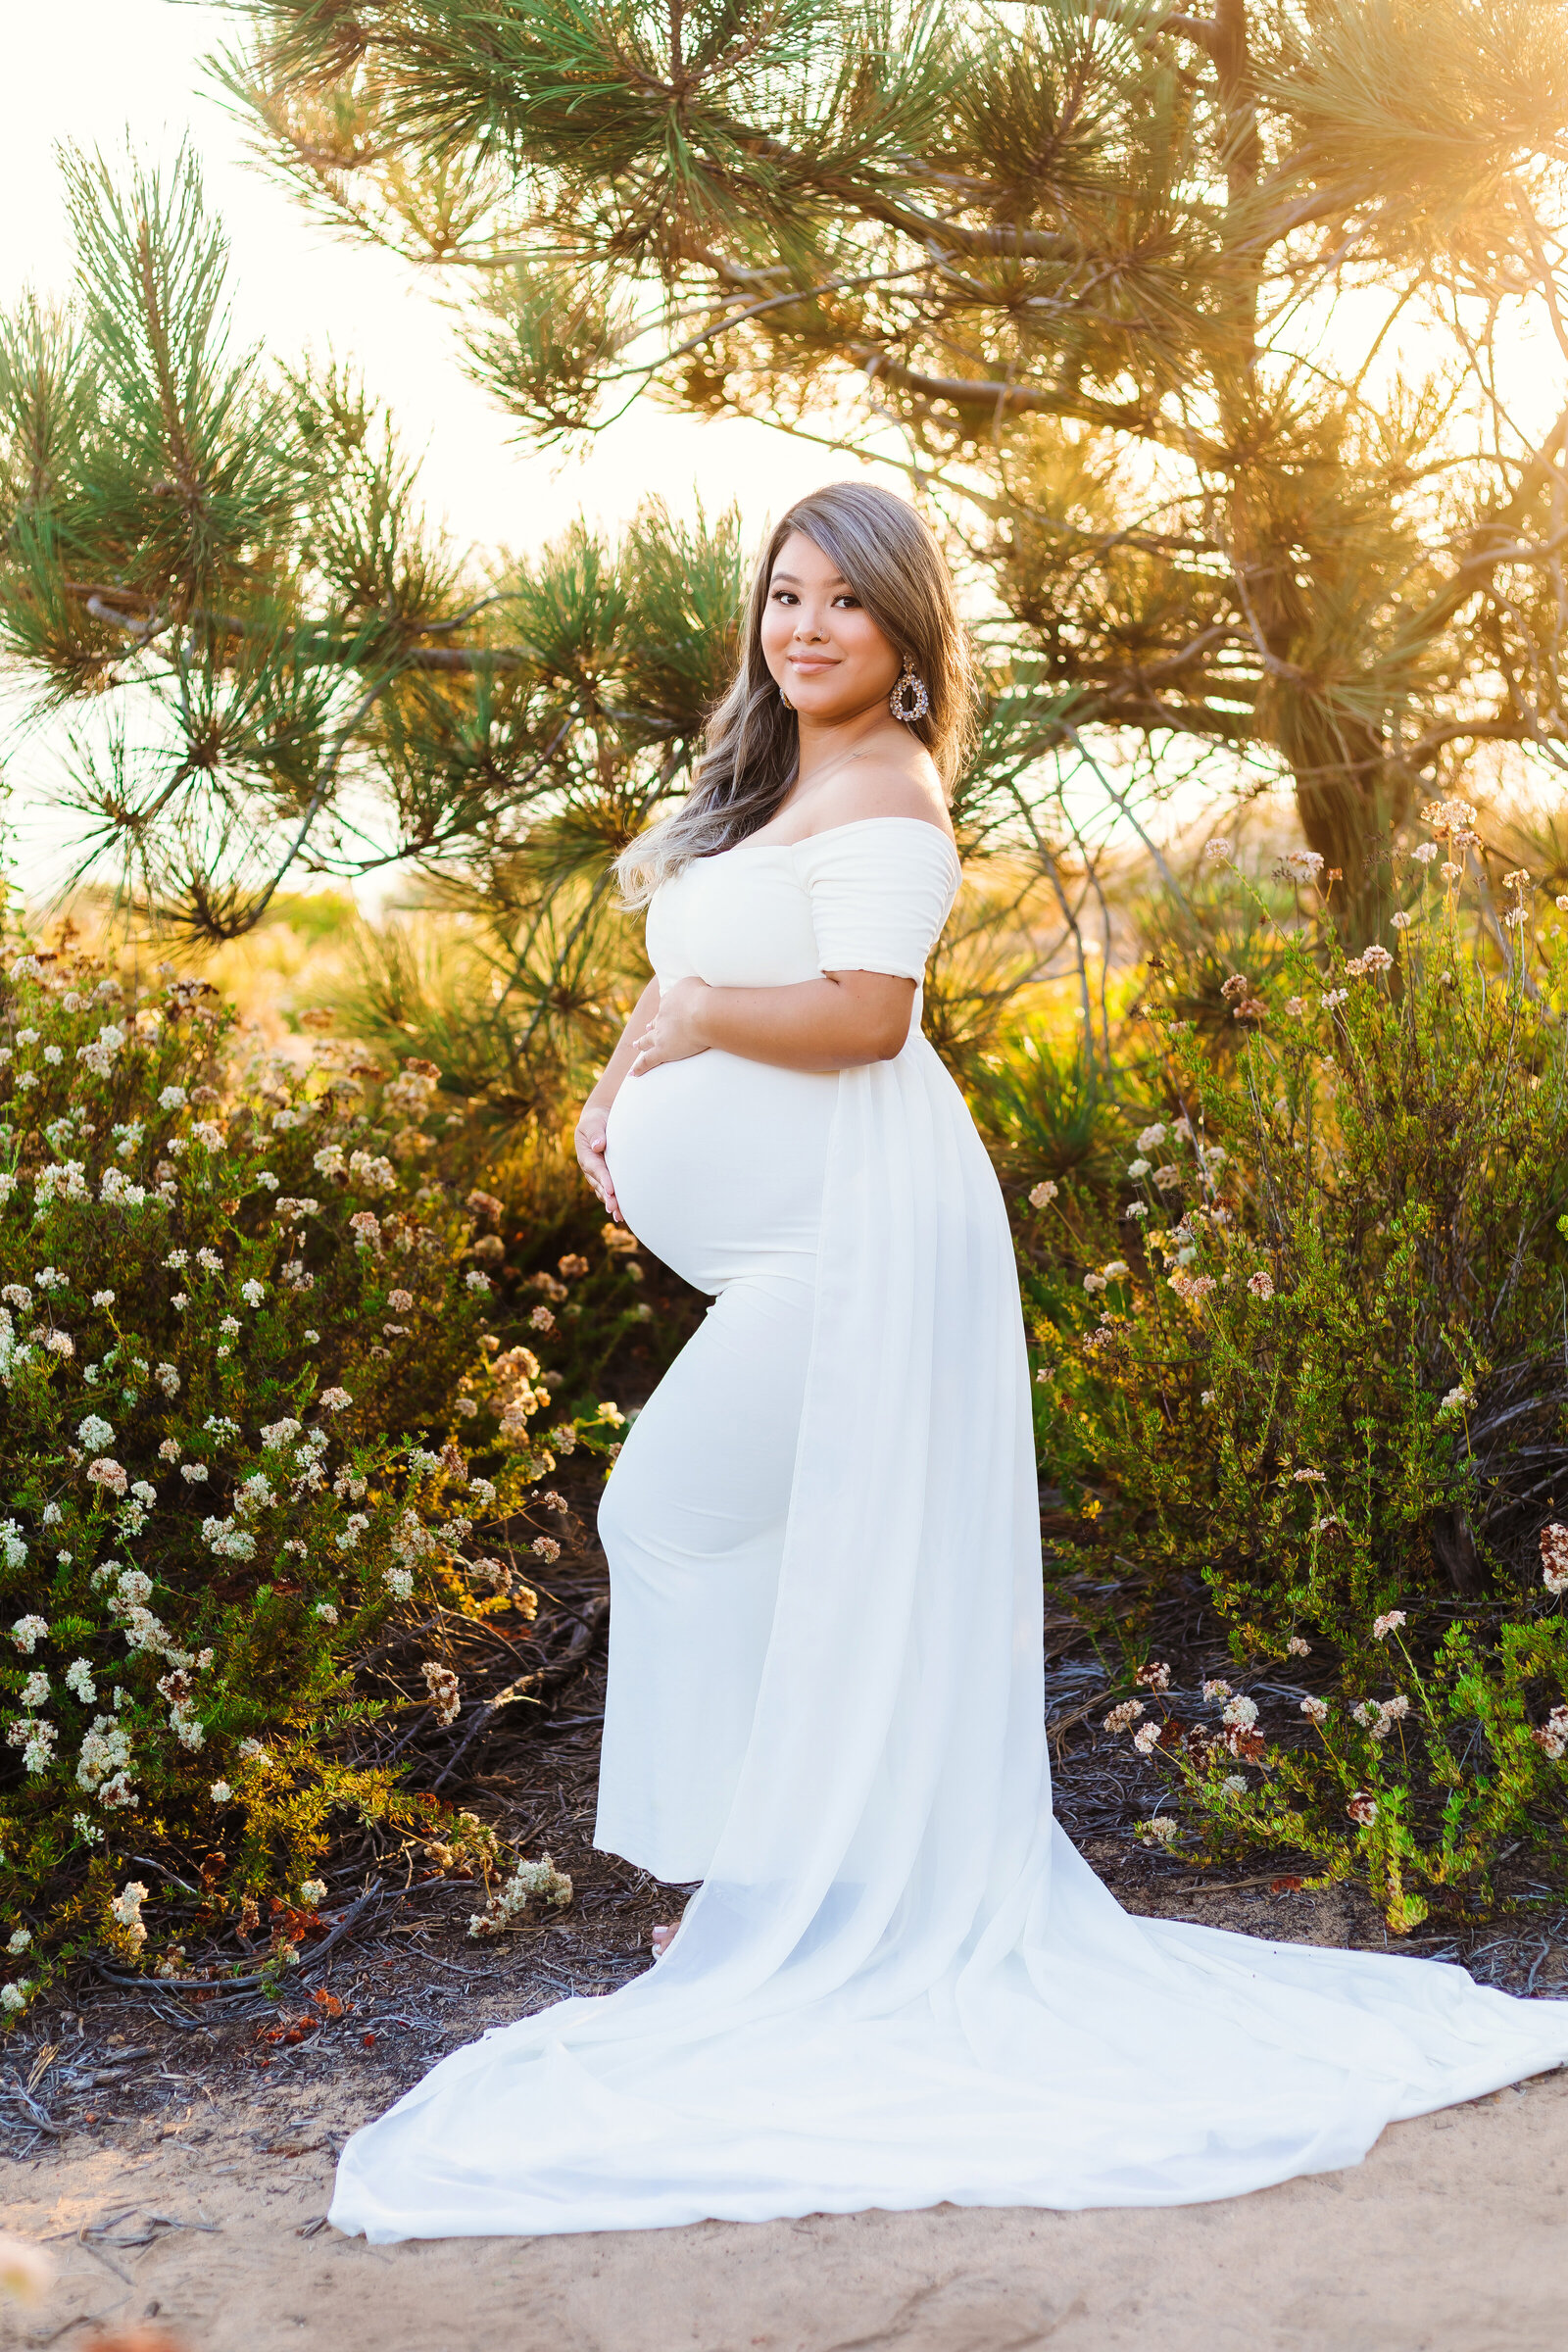 Maternity Photographer, a pregnant woman stands happy with hands on her belly near chaparral